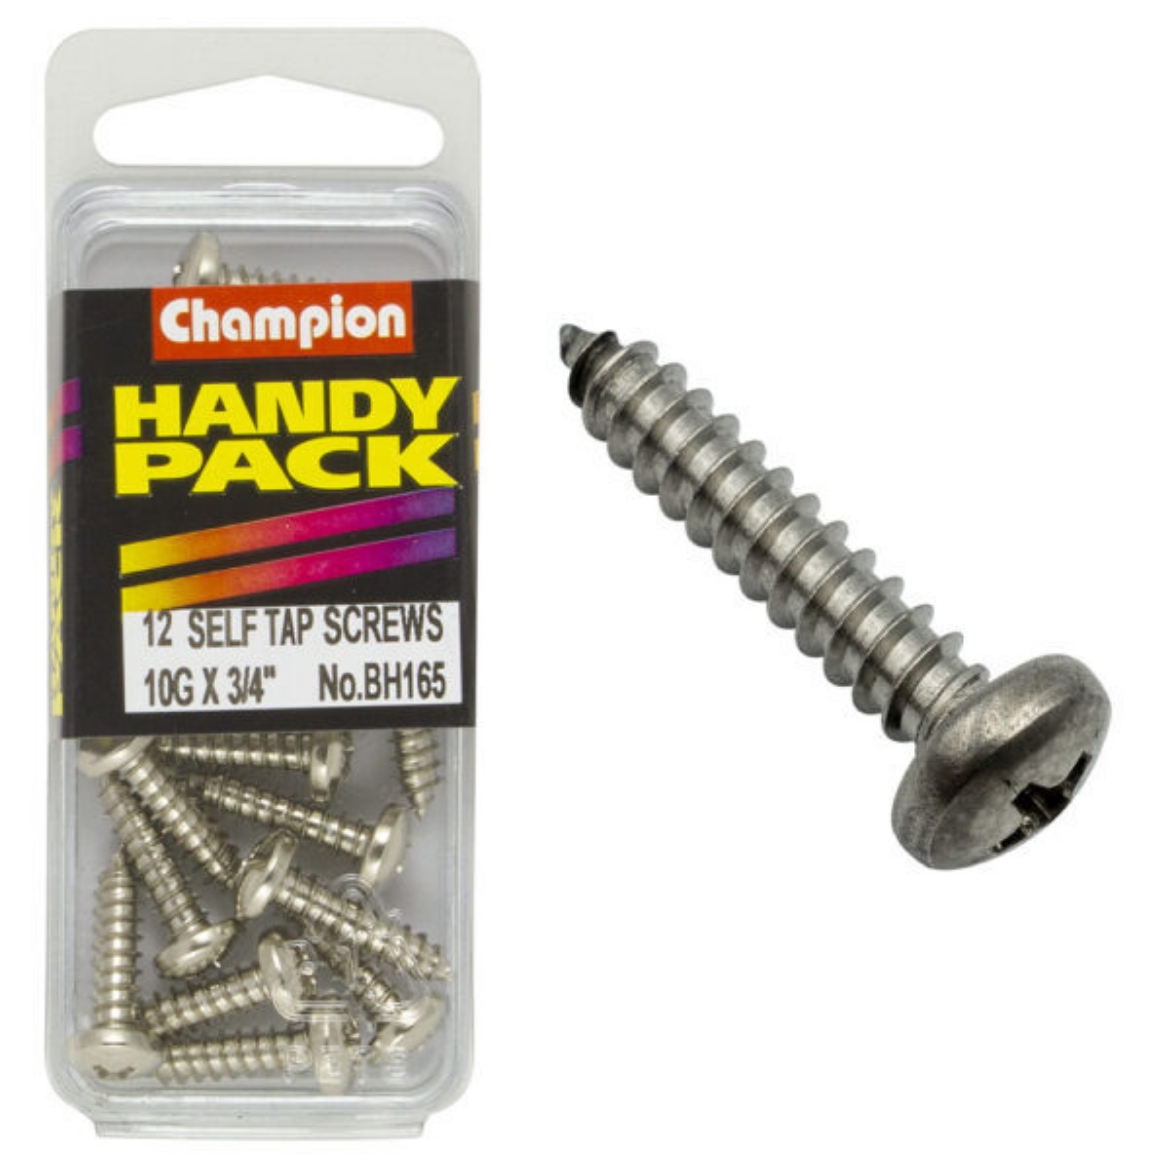 Picture of Handy Pk Self Tap Screw pan head 10g x 3/4 CST (Pkt.12)